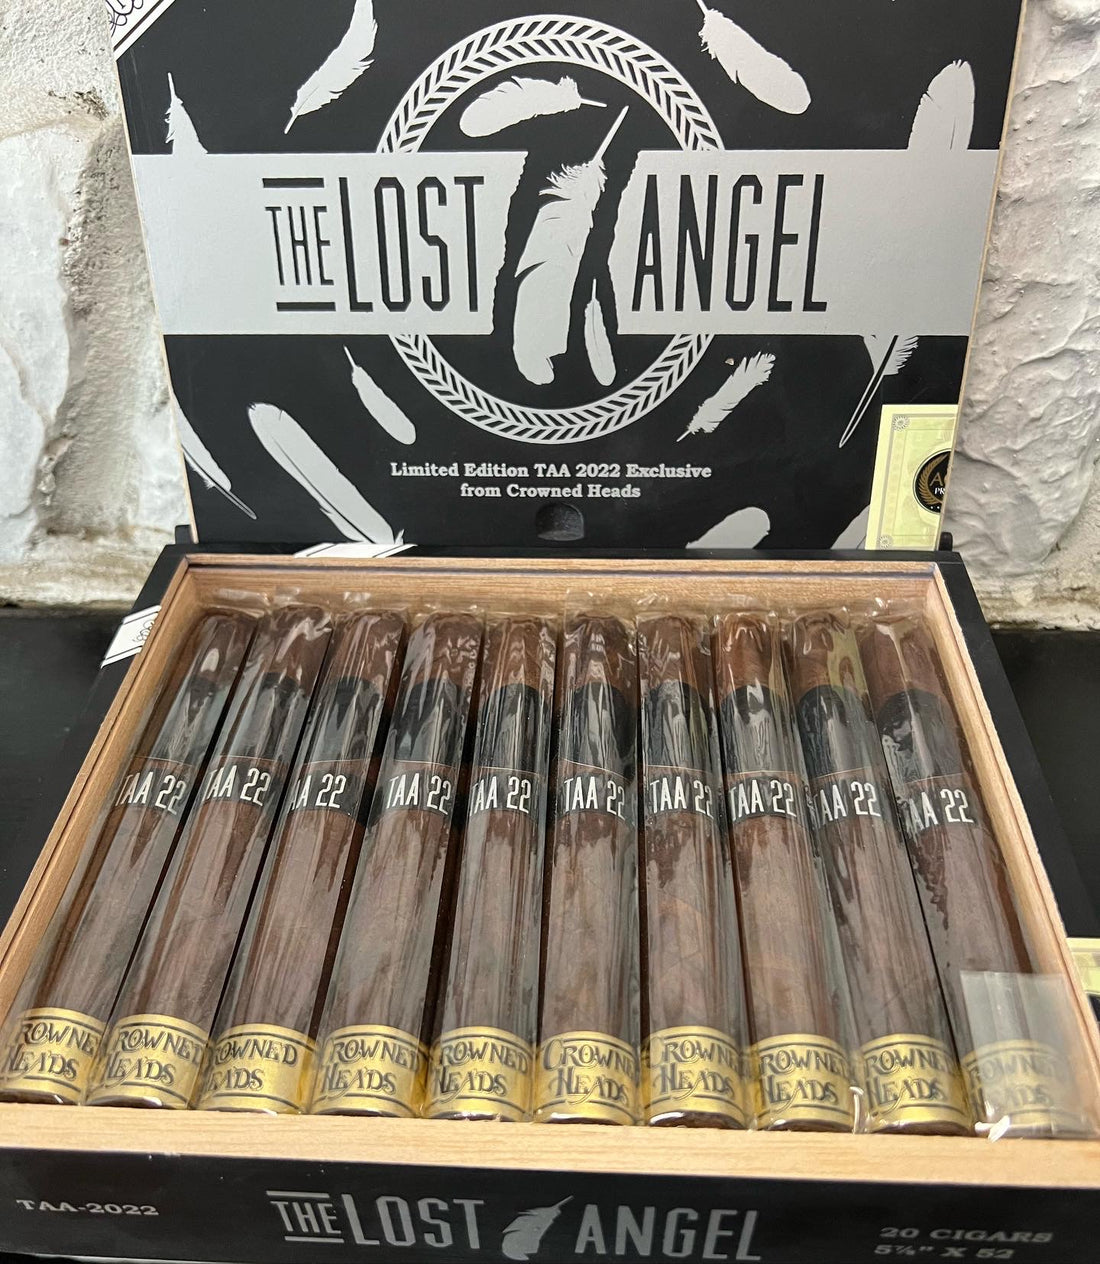 The TAA Lost Angel 2022 by Crowned Heads